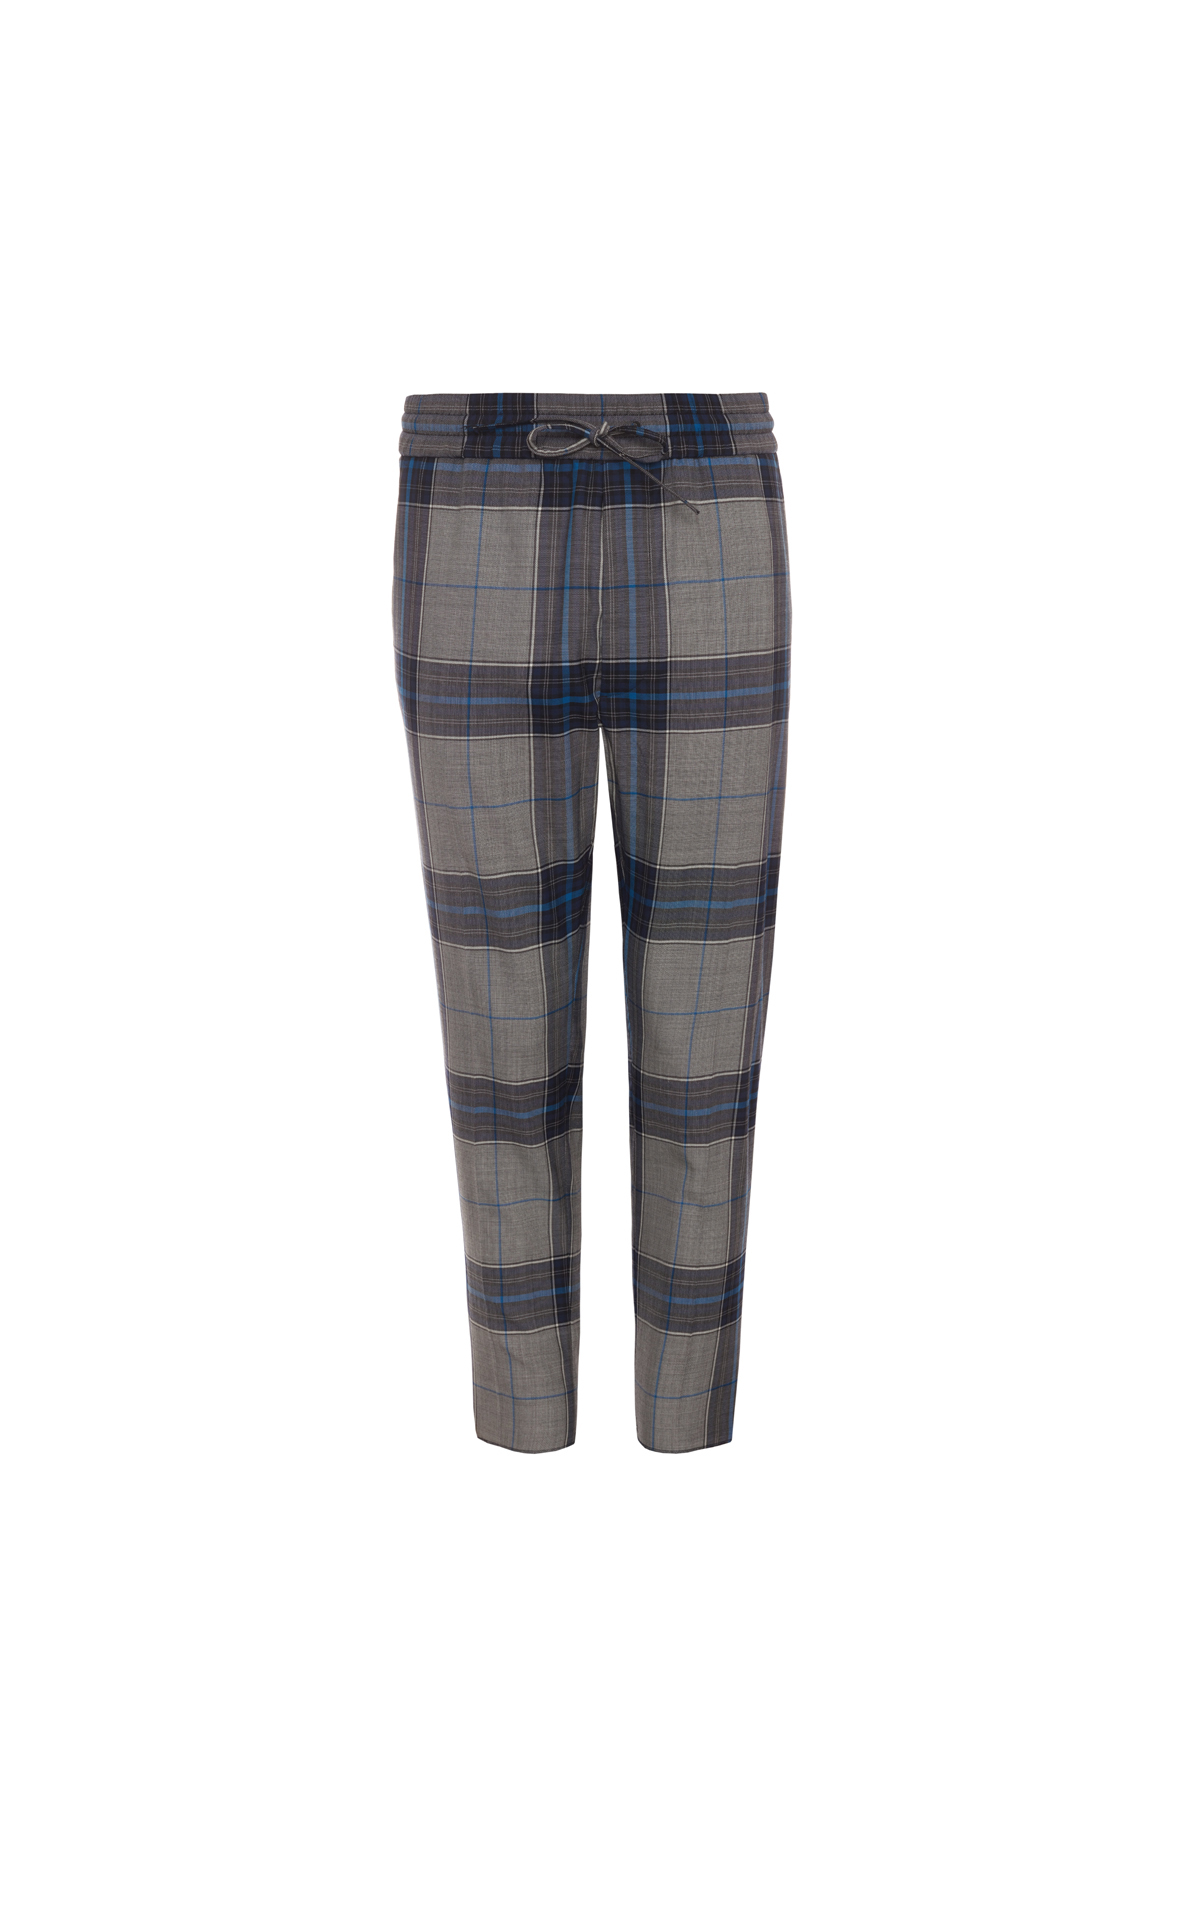 Vivienne Westwood Elastic cropped george trousers from Bicester Village